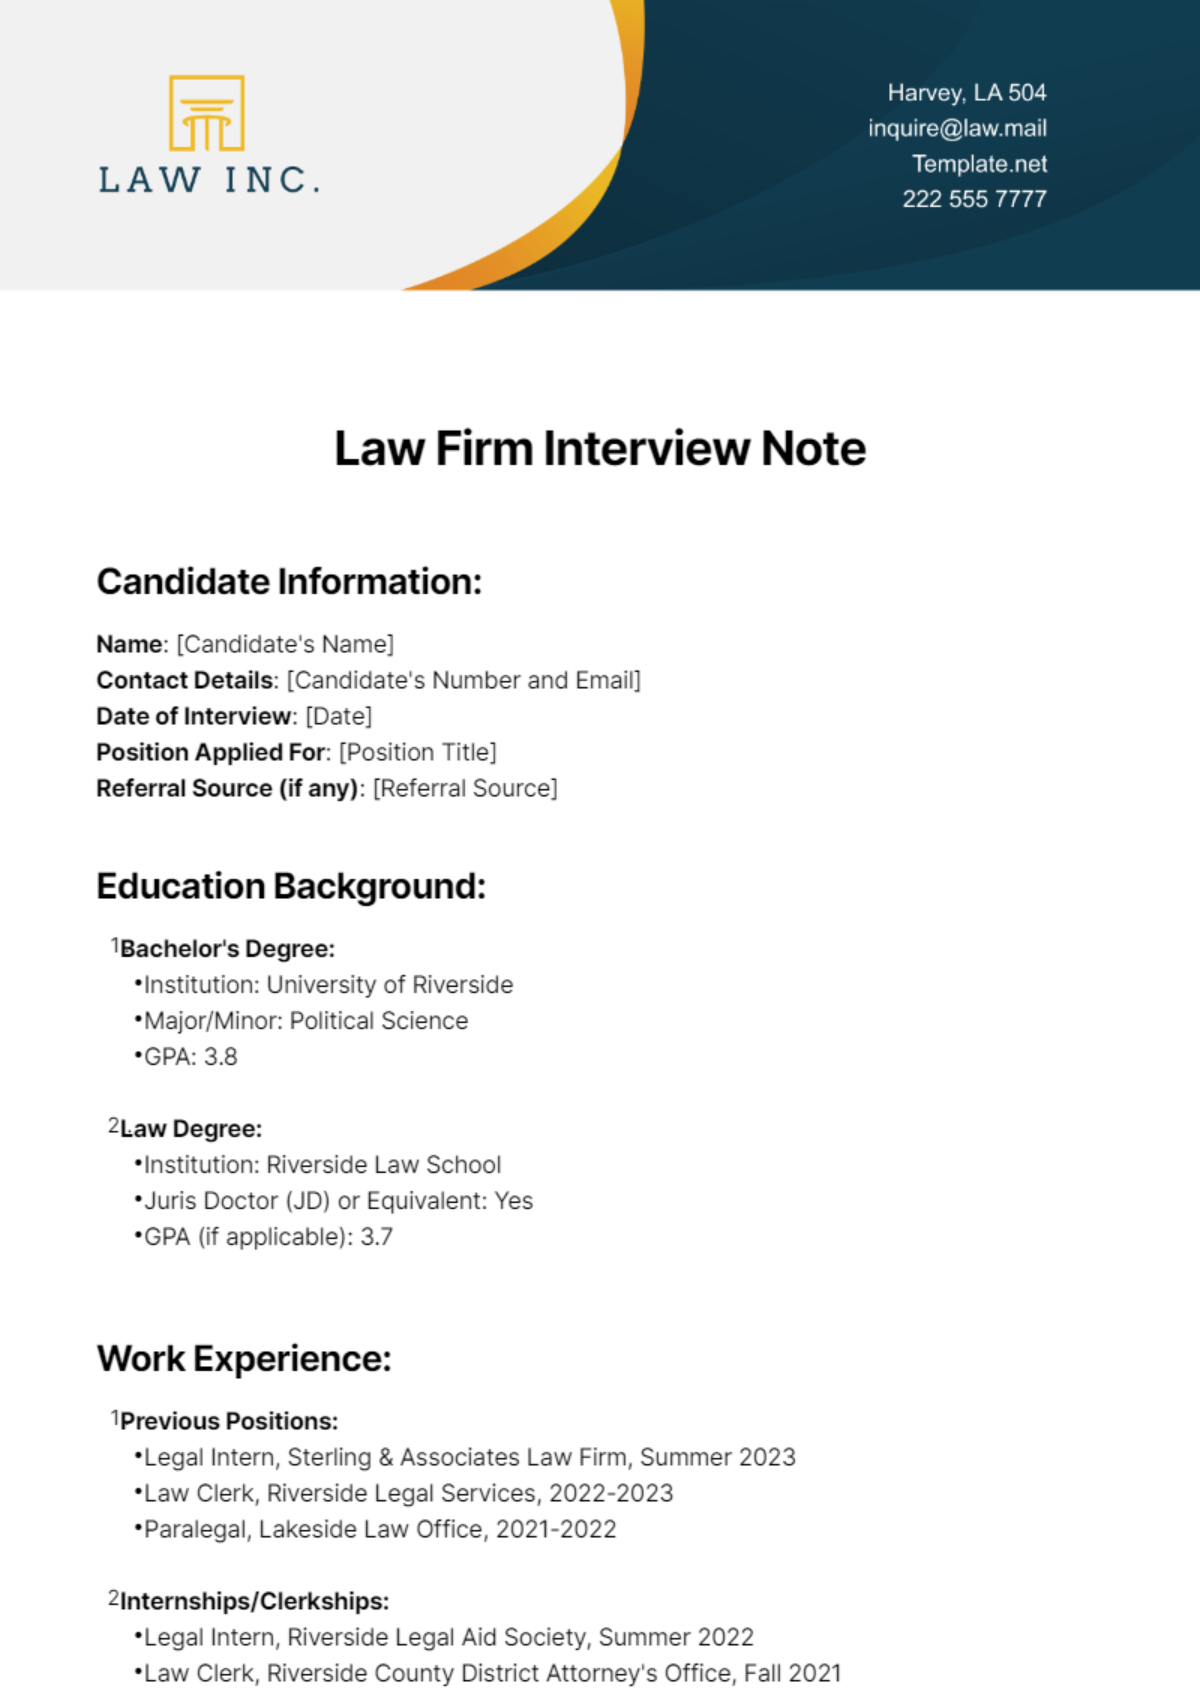 Law Firm Interview Note Template